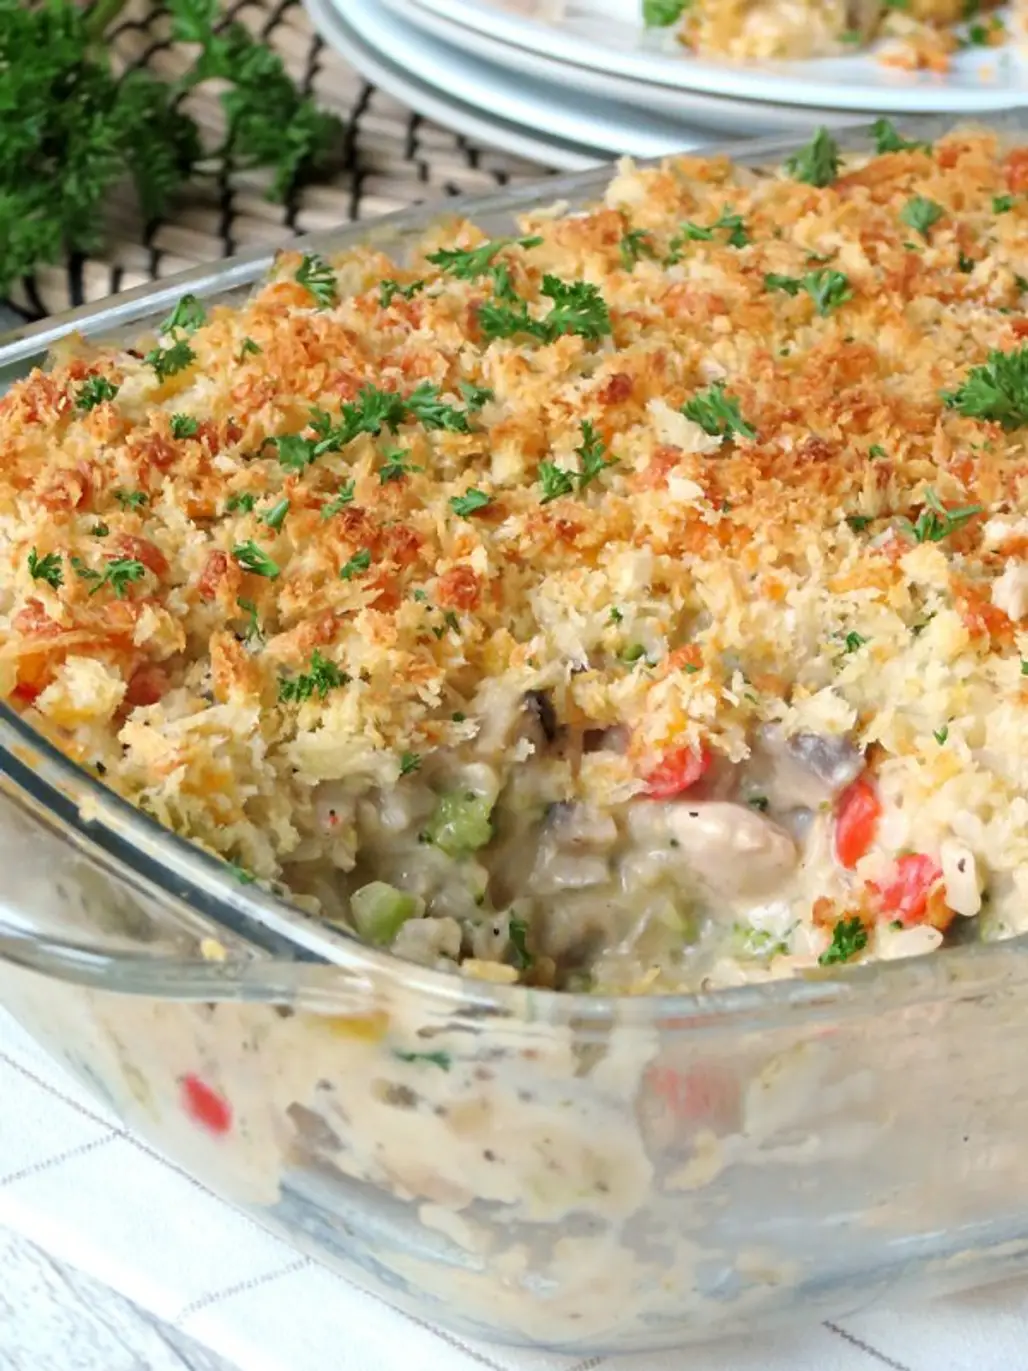 Chicken and Brown Rice Casserole with Veggies